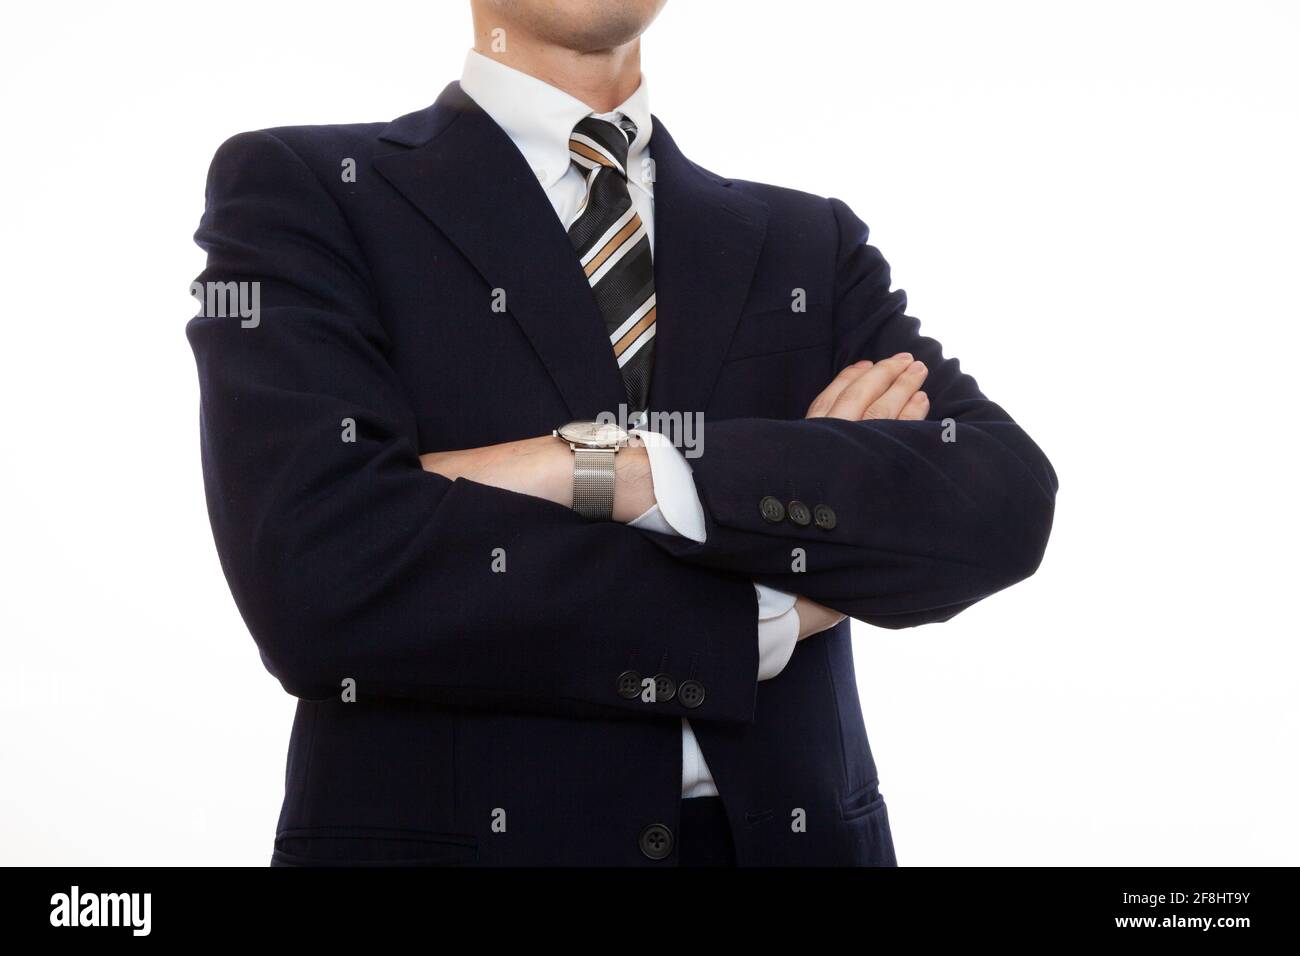 A dignified business person with arms folded Stock Photo